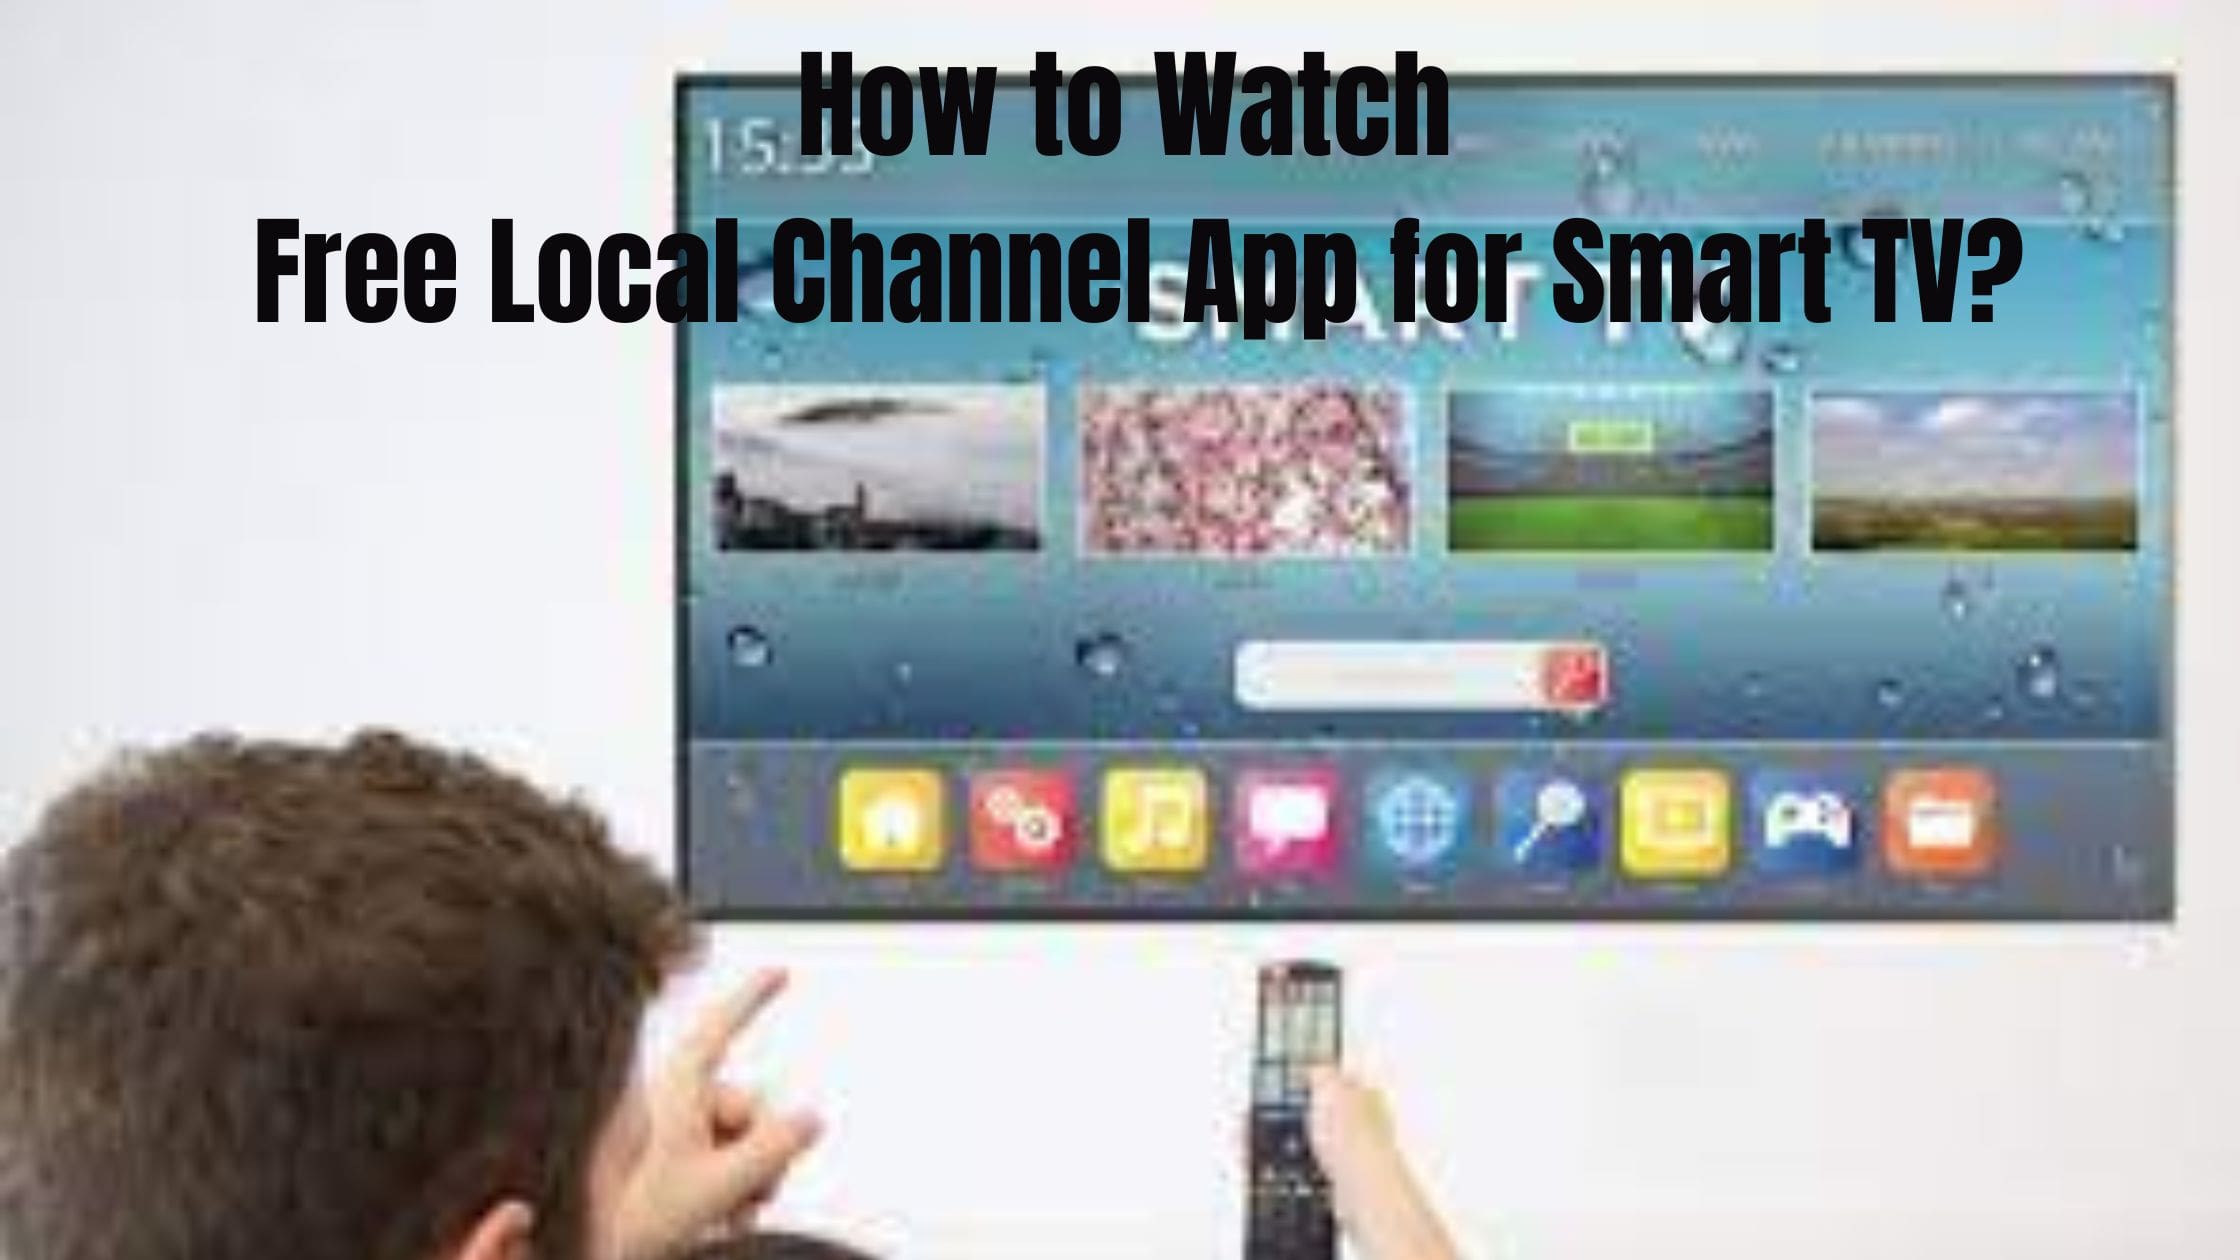 How to Watch Free Local Channel App for Smart TV